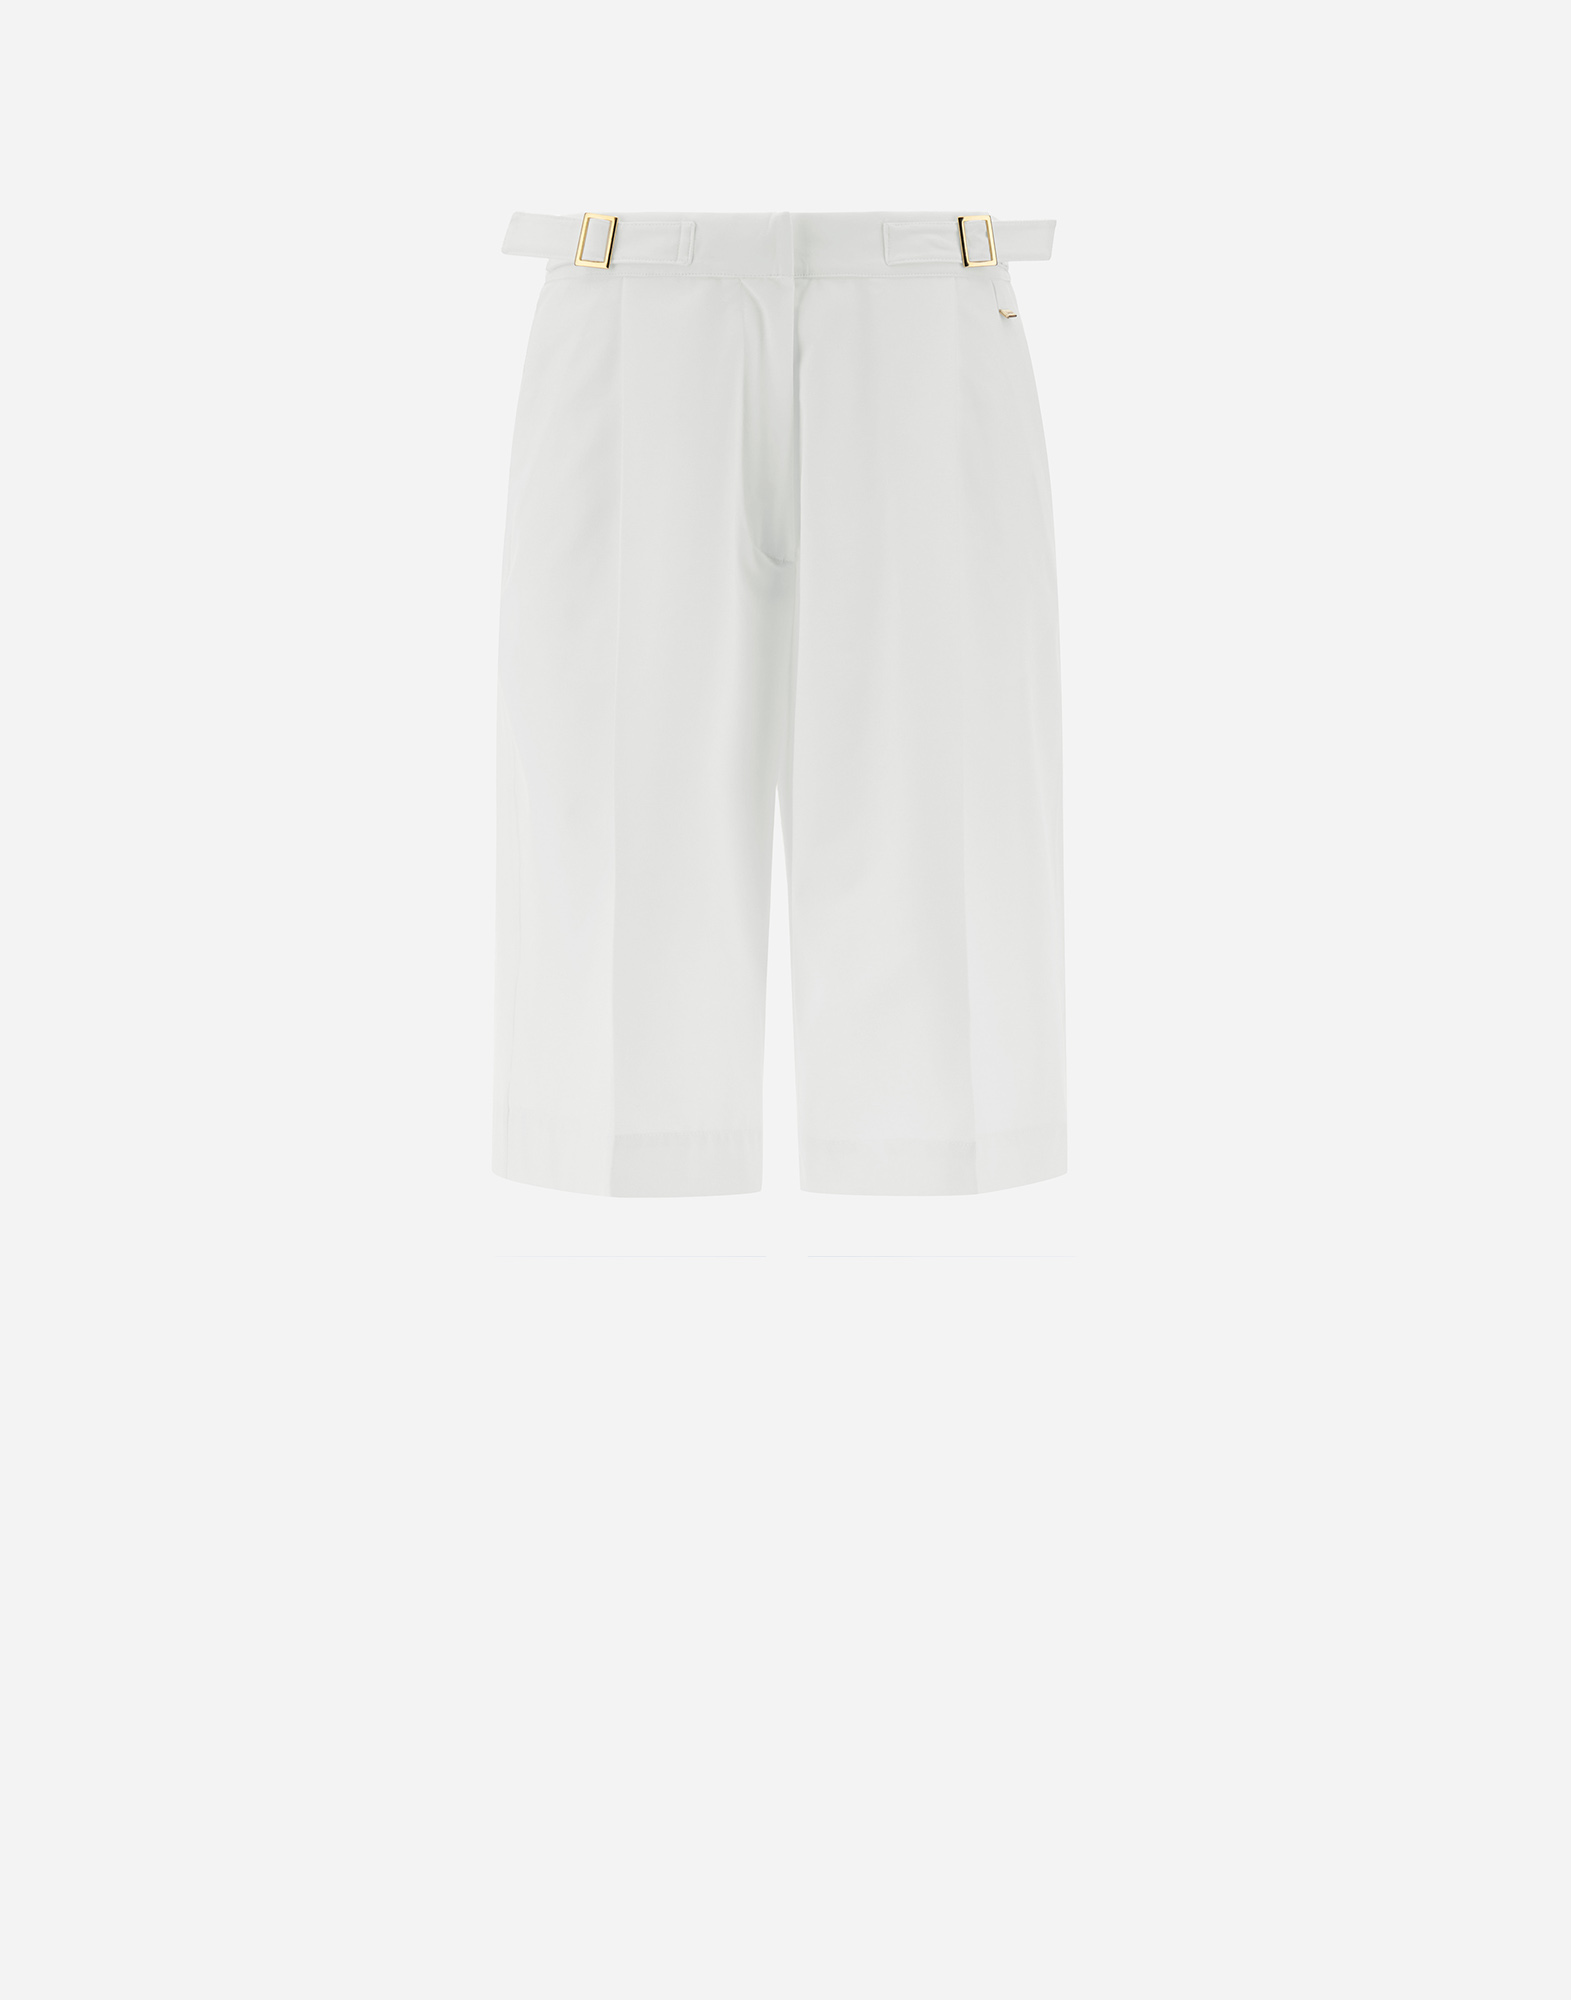 Herno Structures Nylon Shorts In White